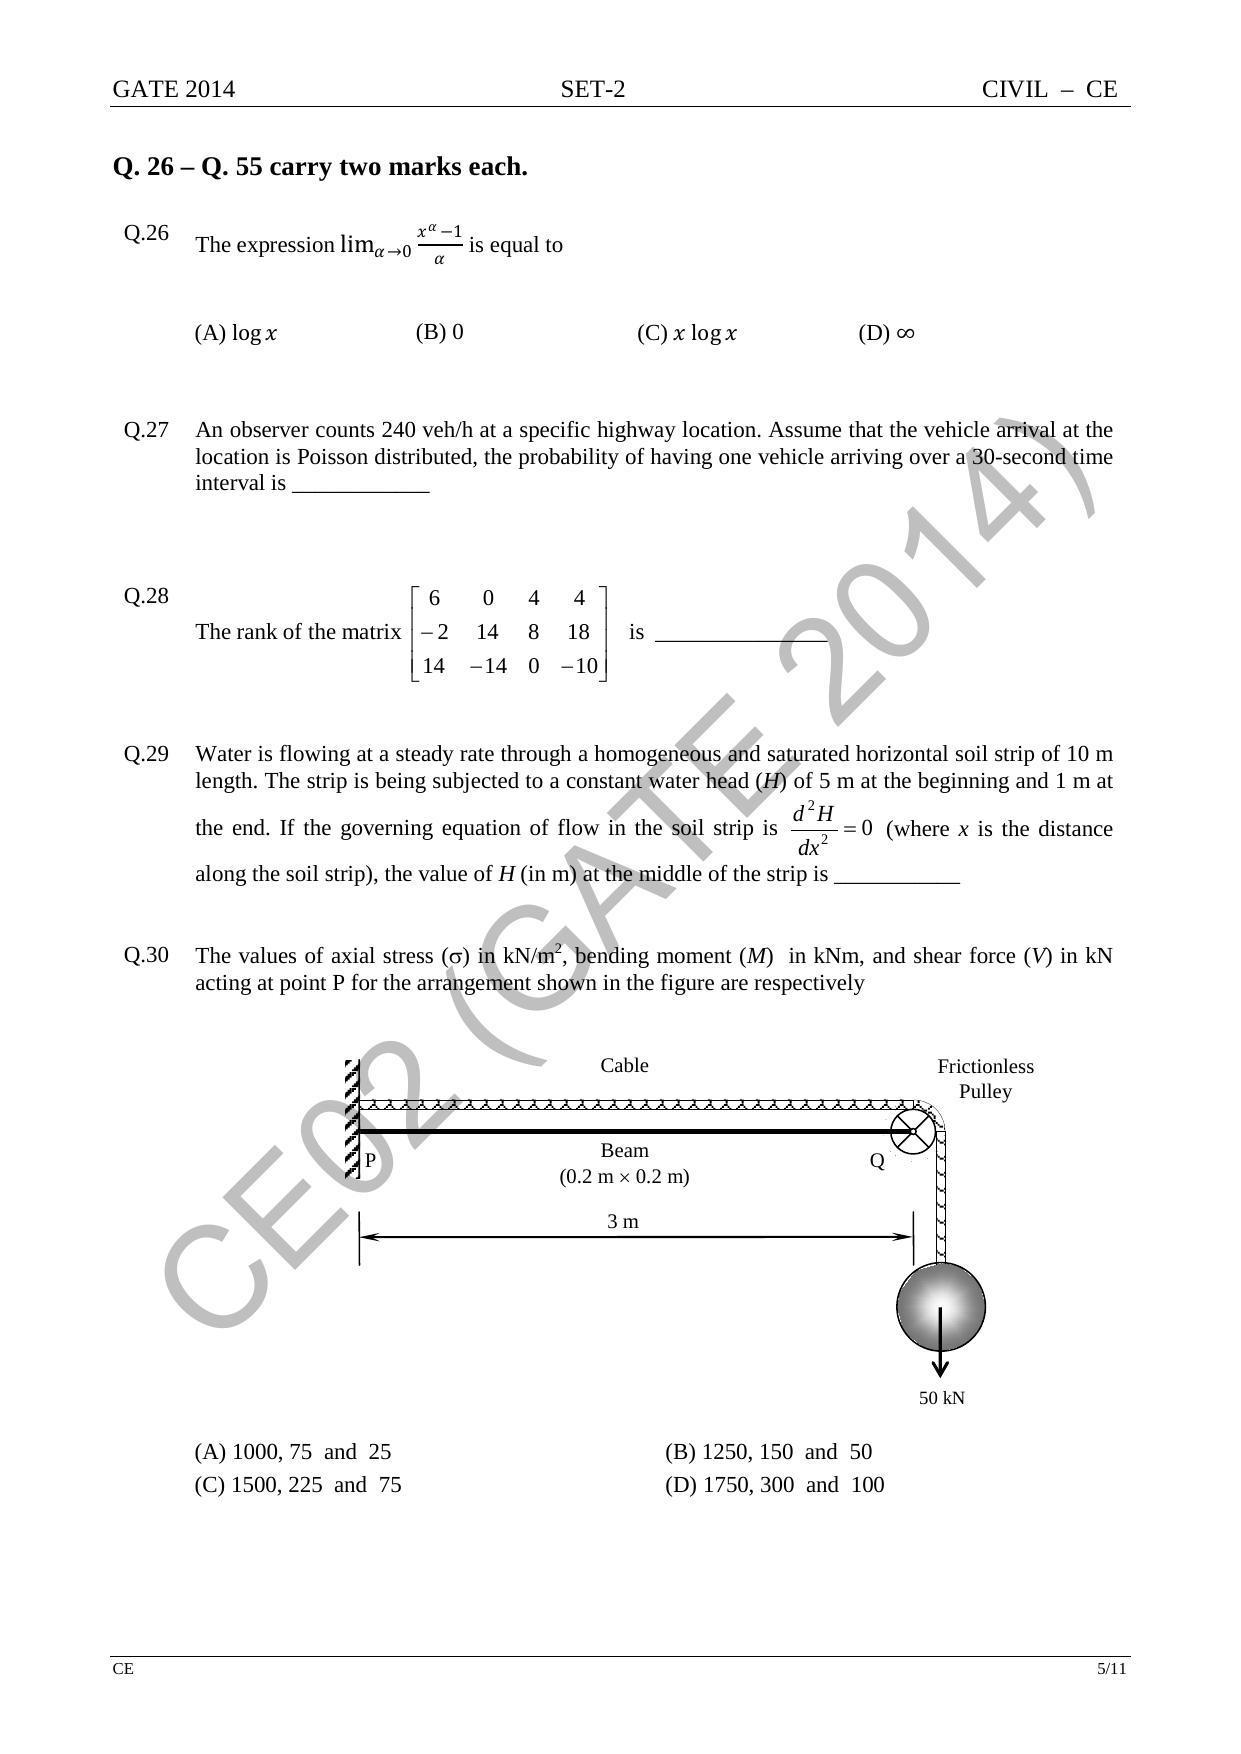 GATE 2014 Civil Engineering (CE) Question Paper with Answer Key - Page 33